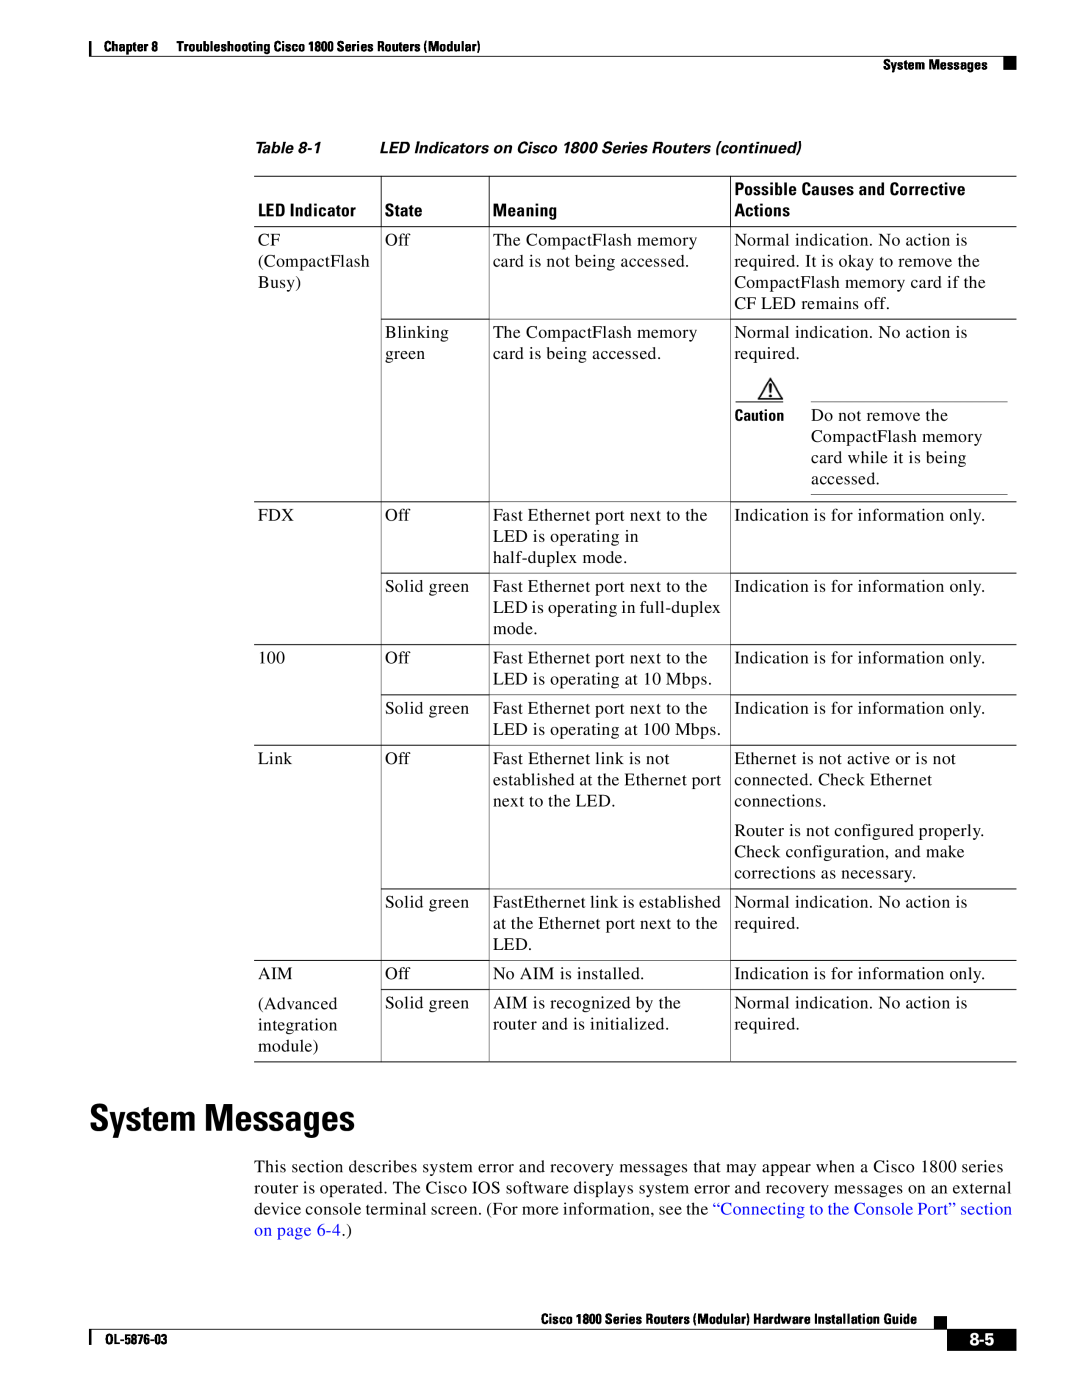 Cisco Systems CISCO1841-HSEC/K9-RF manual System Messages, LED Indicators on Cisco 1800 Series Routers continued 